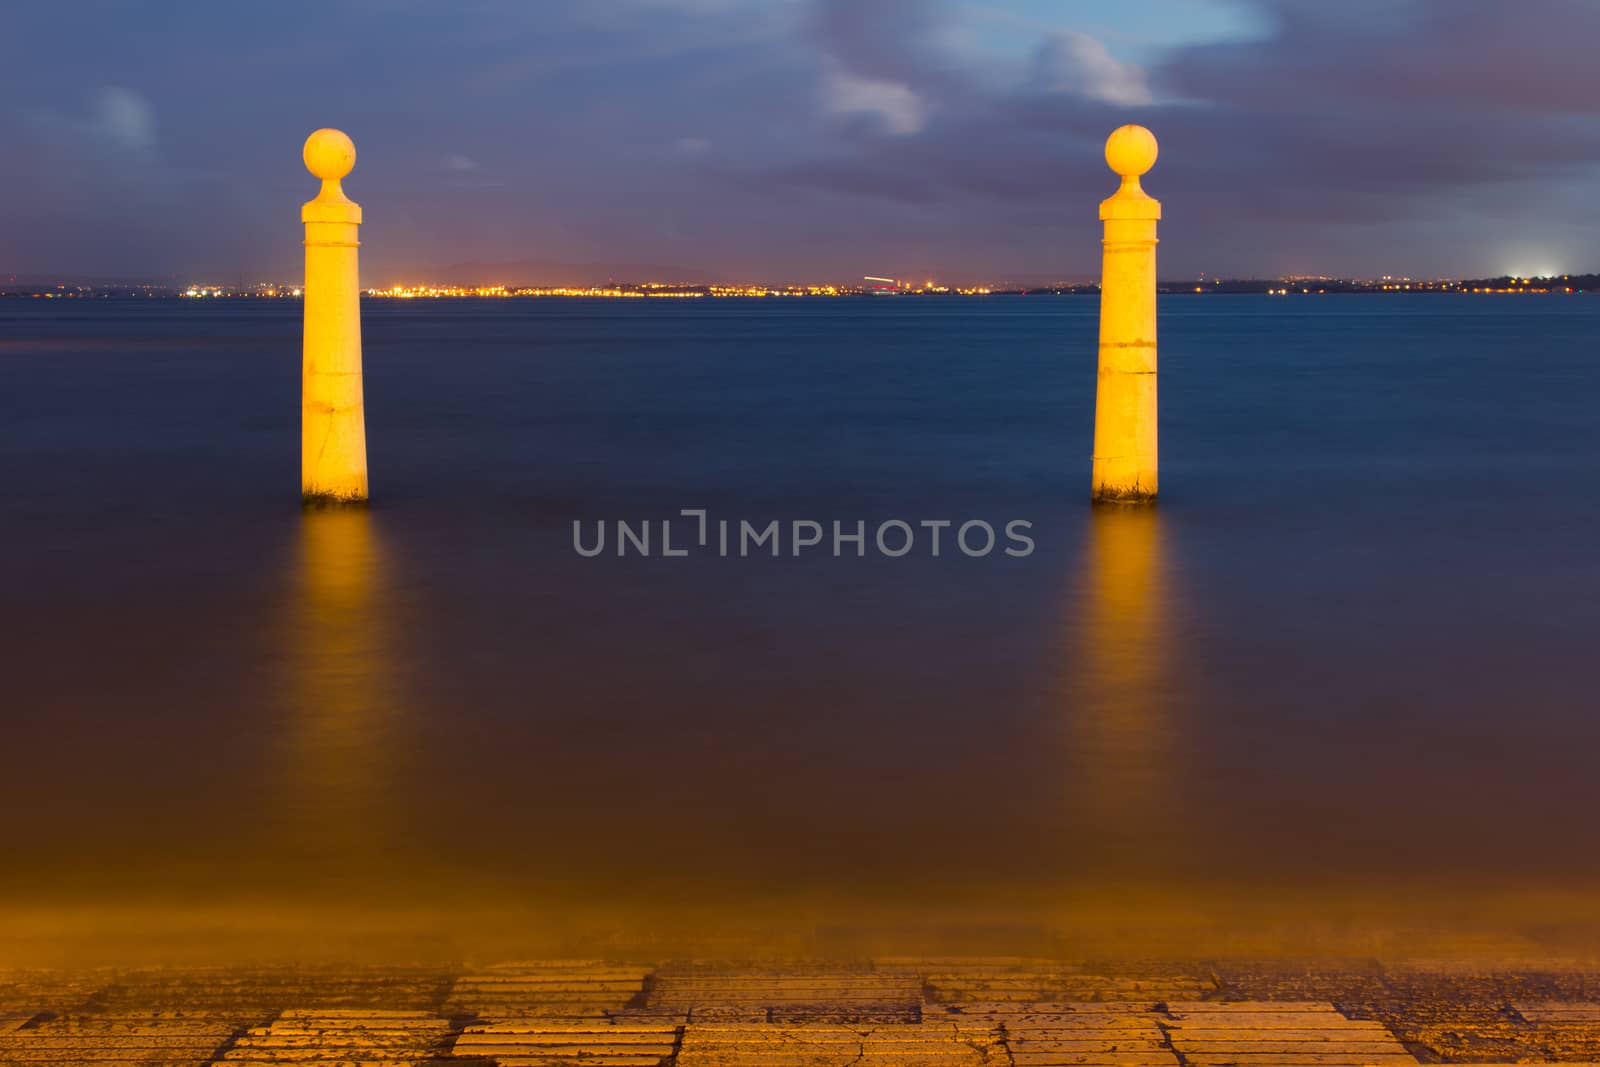 Columns Pier by the Tagus river in Lisbon, long exposure by 1shostak